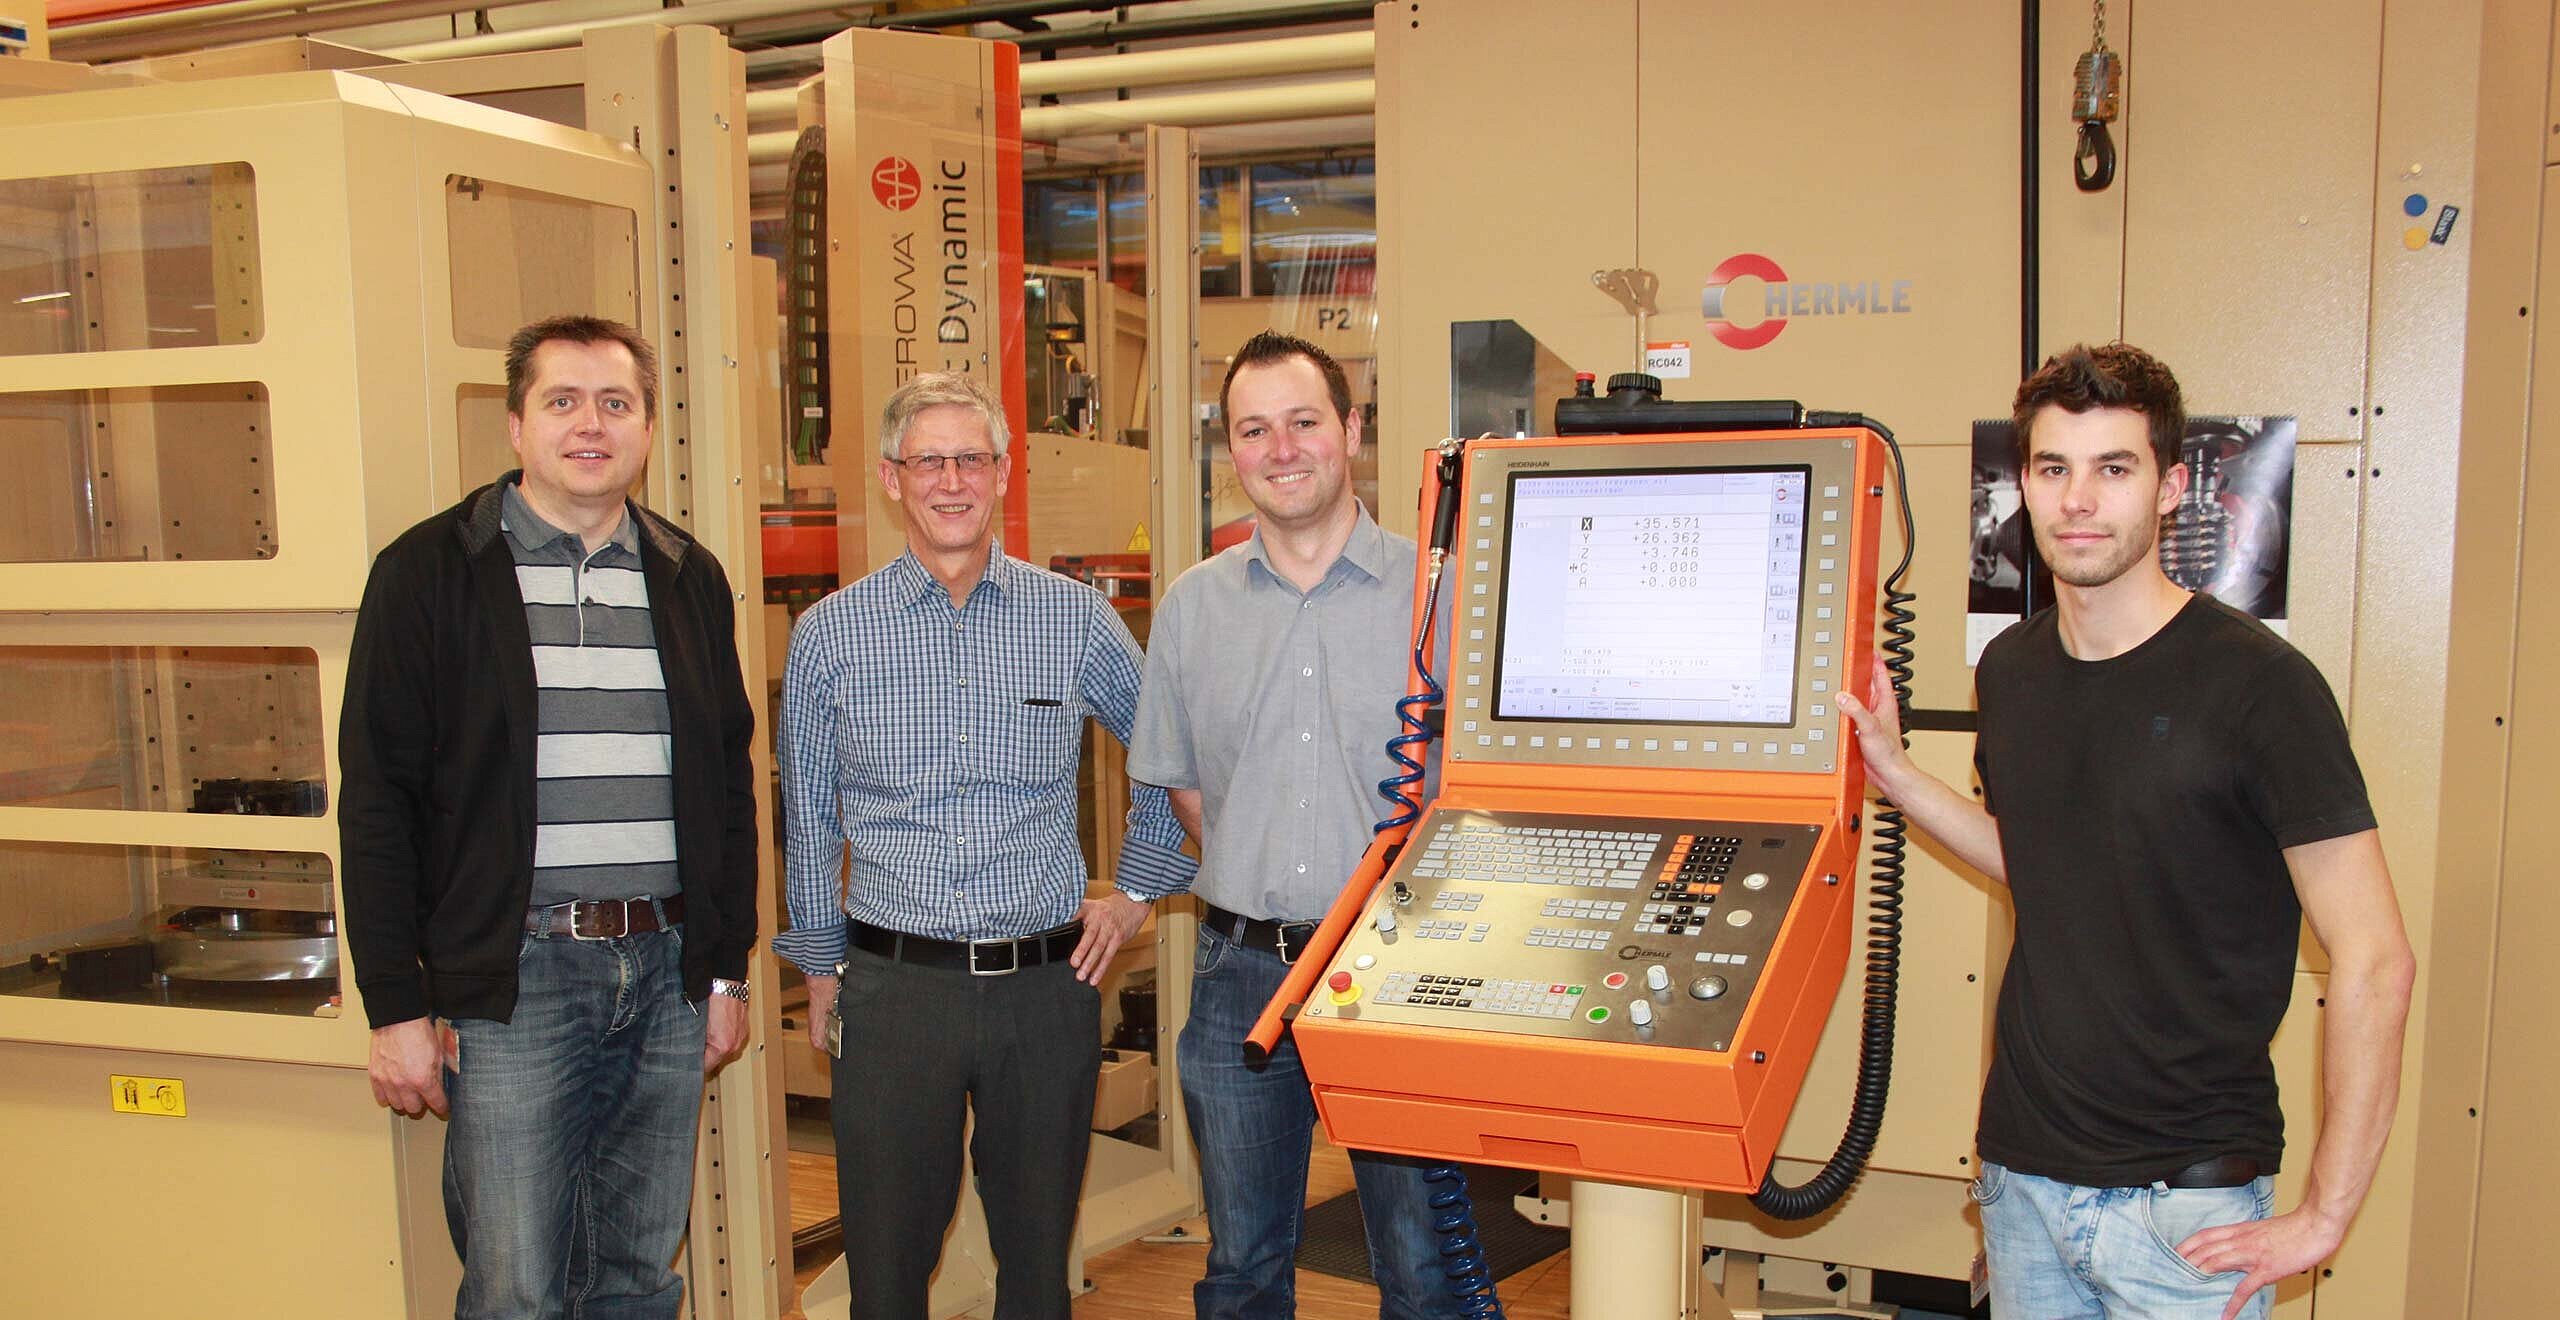 Klaus Holzer, Master Mould Maker responsible for the MPA project, Gerhard Gorbach, Manager of Equipment Manufacturing, Helmut Böhler, Department Milling Master and machine operator Huf Mathias, all from Julius Blum GmbH